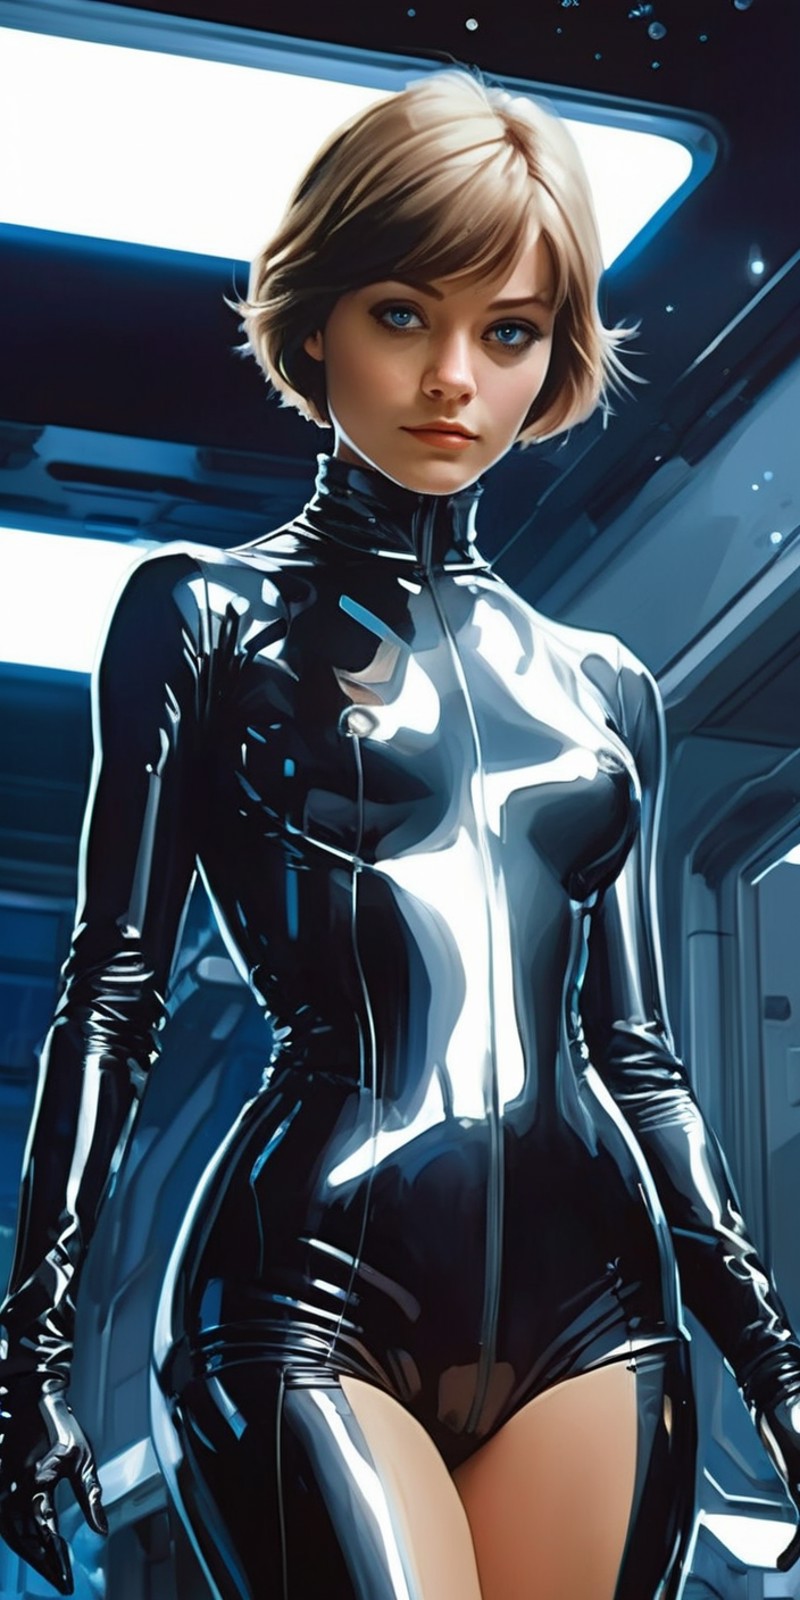 full body illustration of Alisa Selezneva short hair big blue eyes Syd Mead Style - syd mead sci-fi woman with led eyes